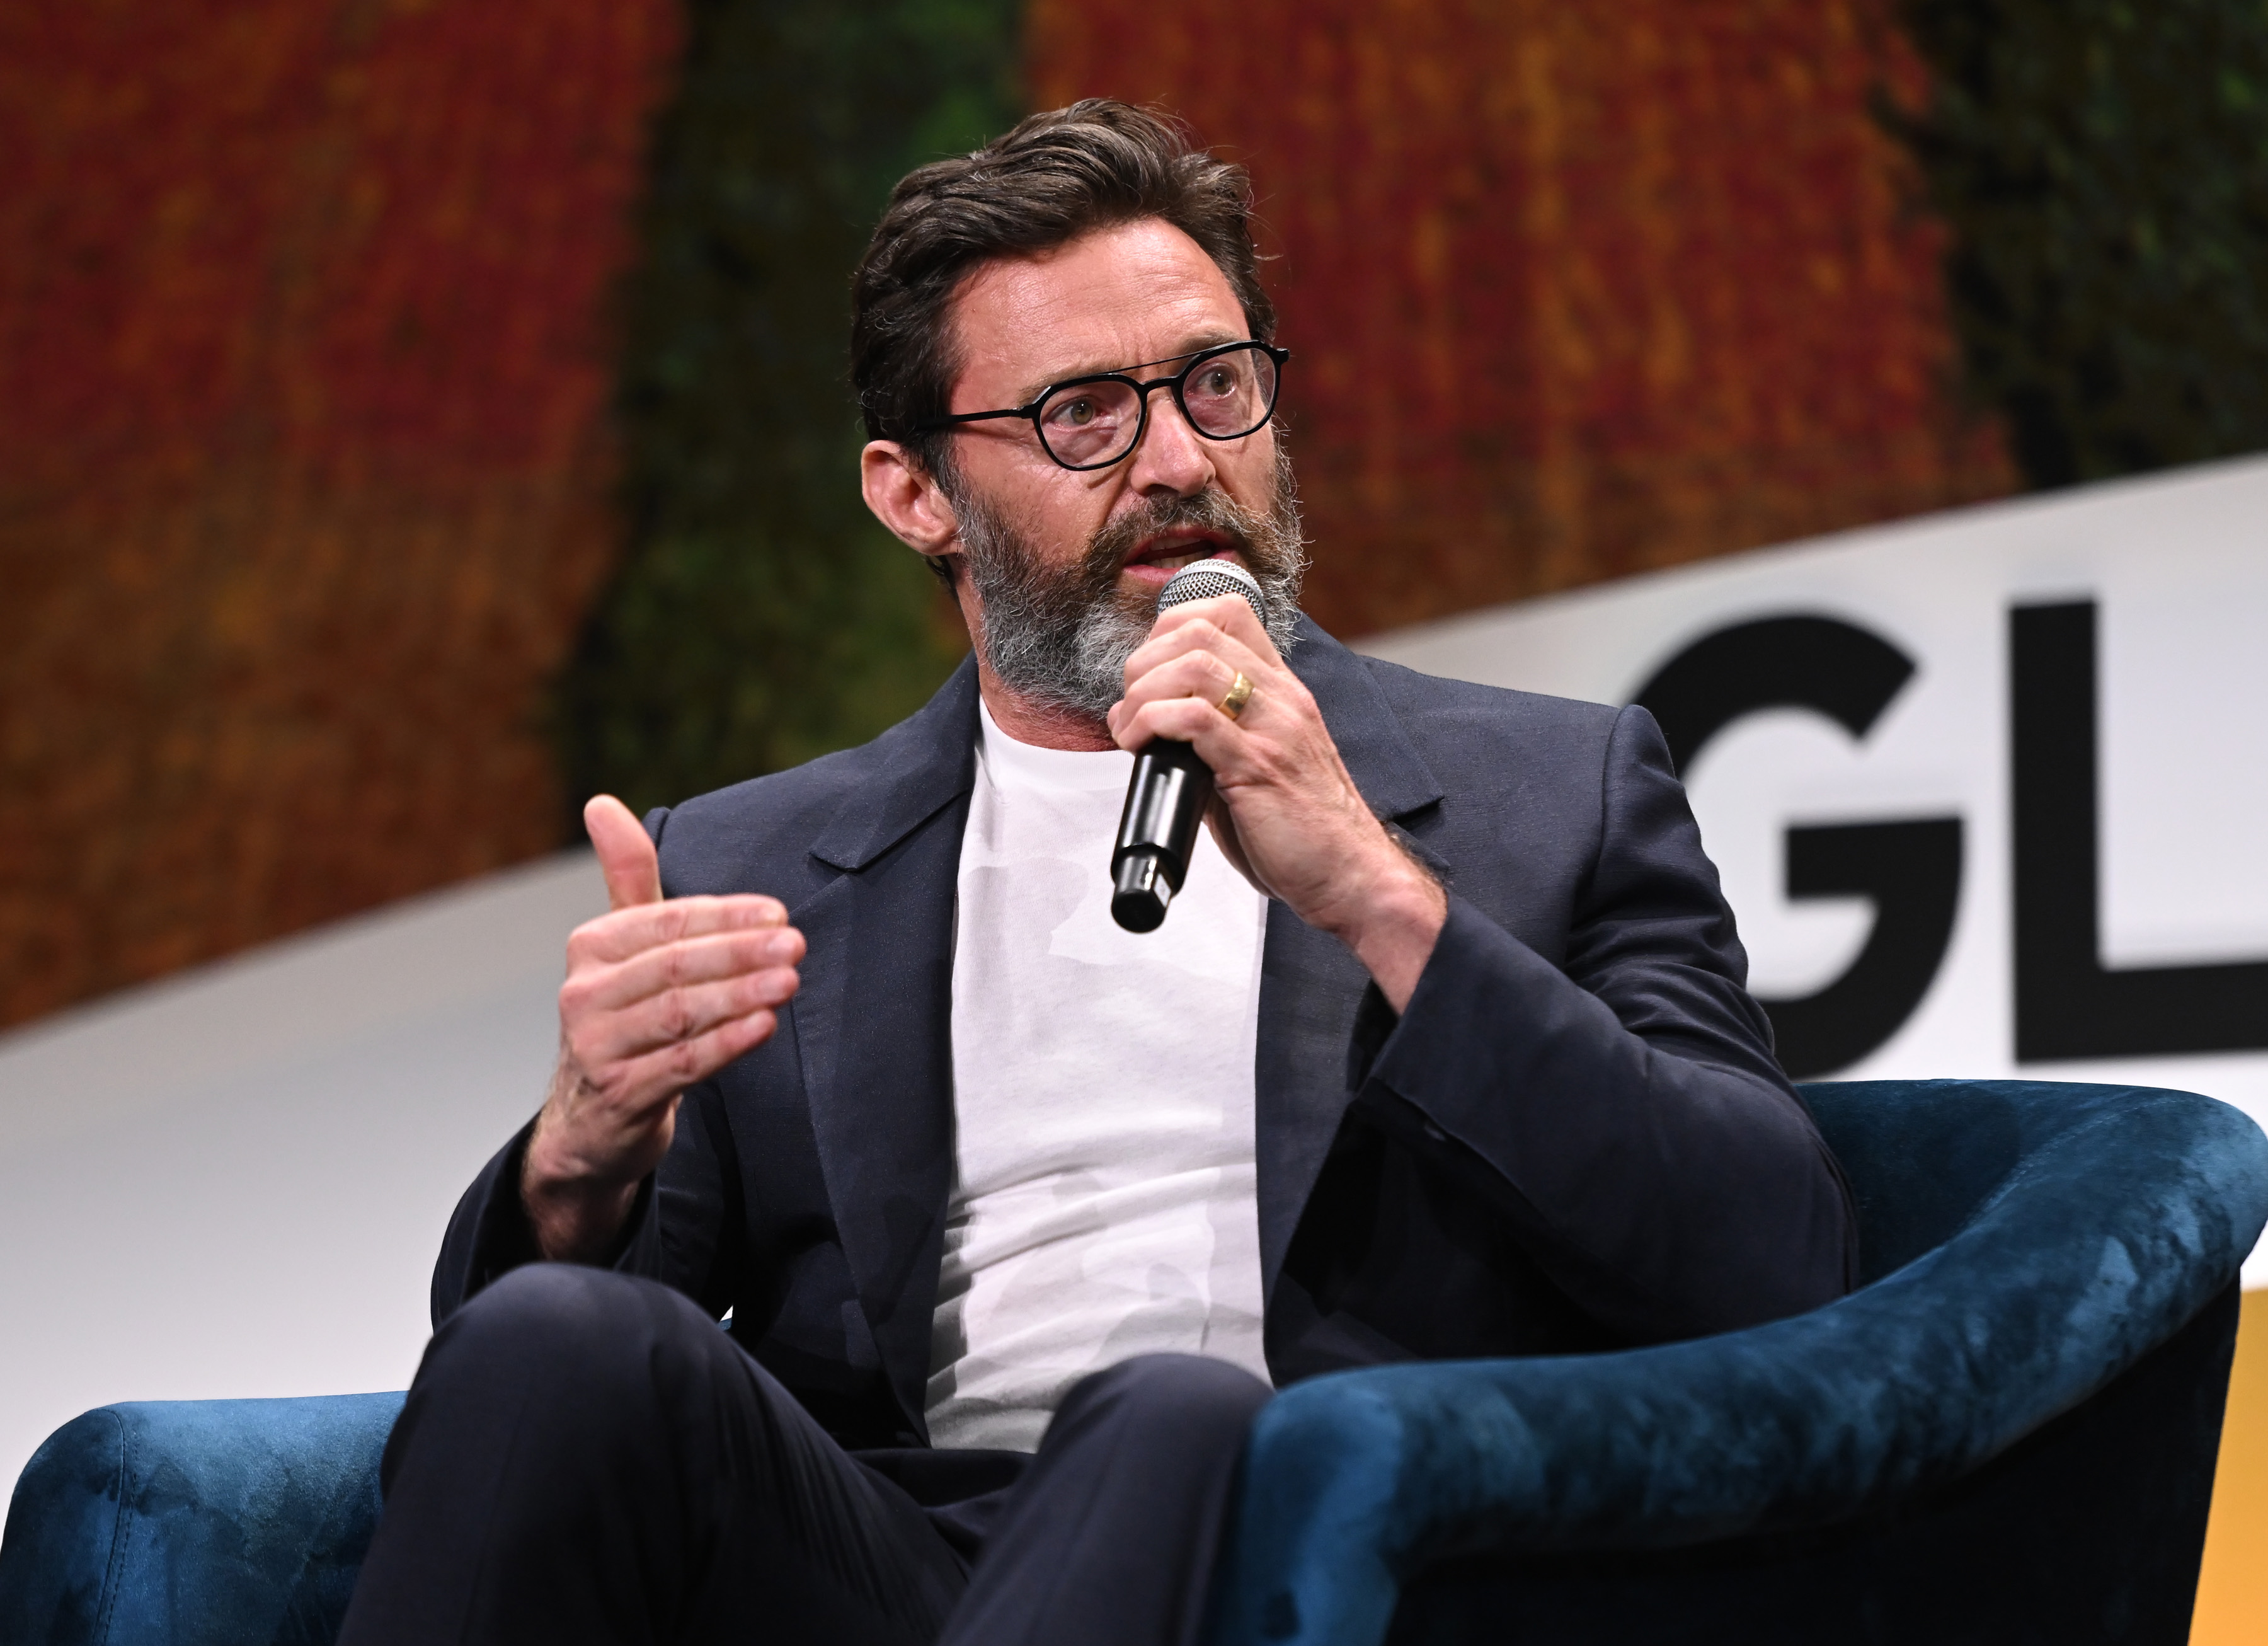 Hugh Jackman speaking at the Global Citizen NOW Summit in New York City on April 27, 2023 | Source: Getty Images